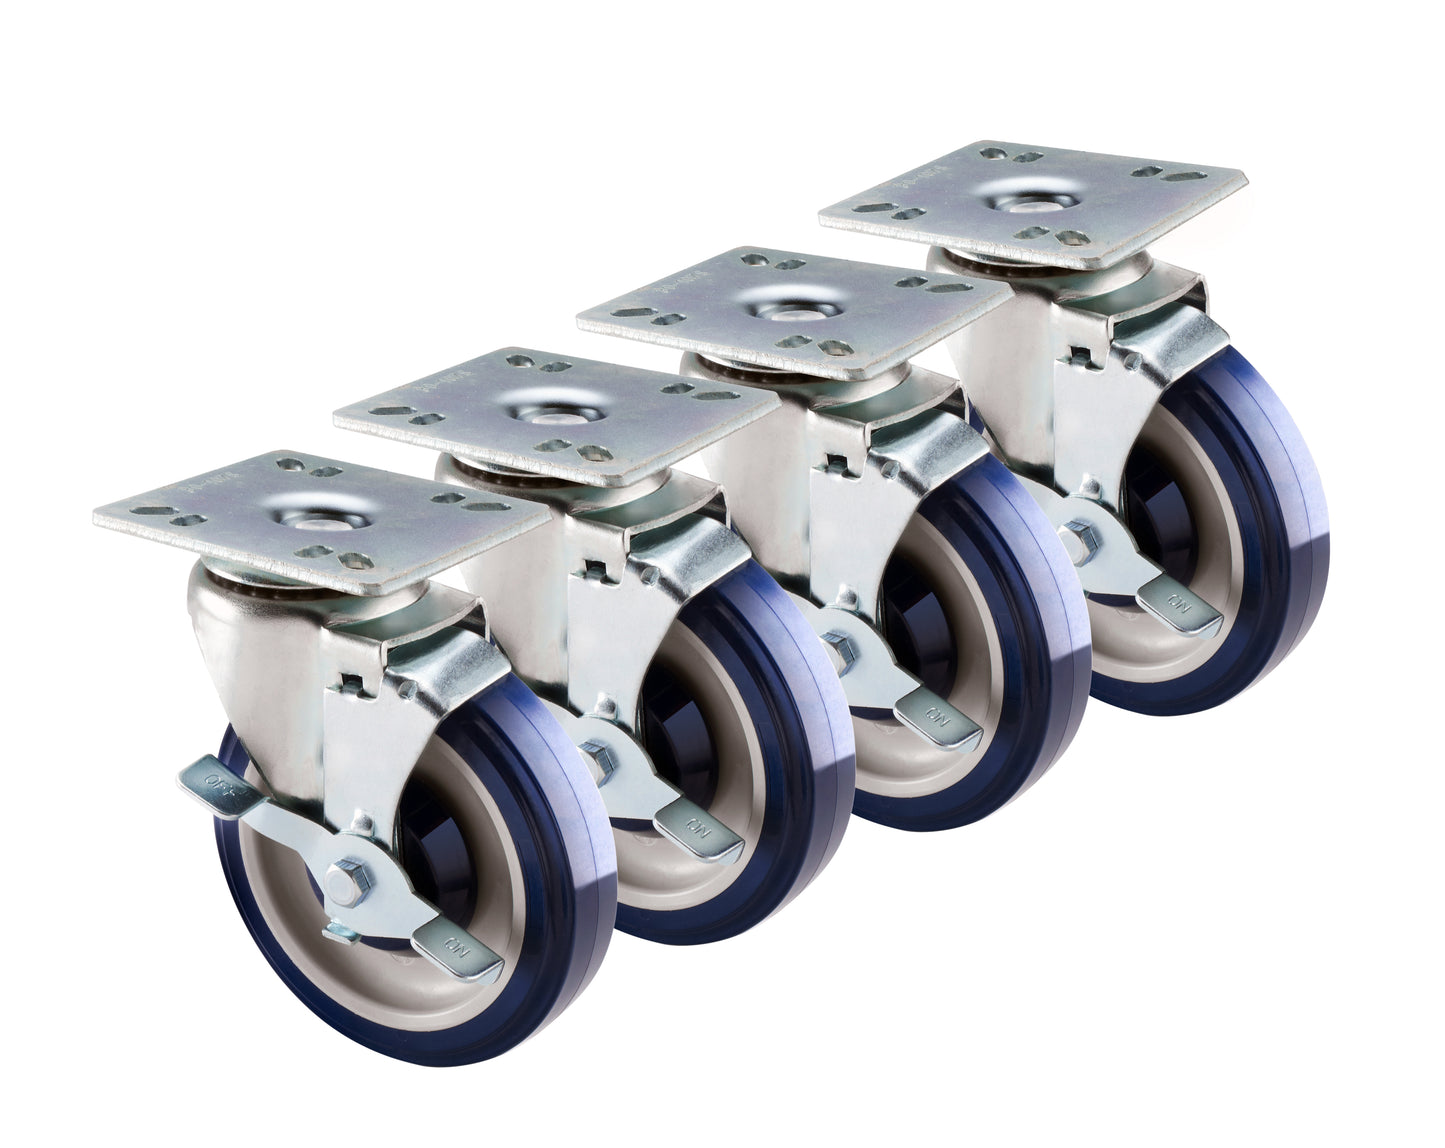 Krowne 30-111S Krowne 30-111S. Economy Series 6" Overall 3-1/2" x 3-1/2" Universal Plate Caster with Side Brake, 5" Wheel, Set of 4.